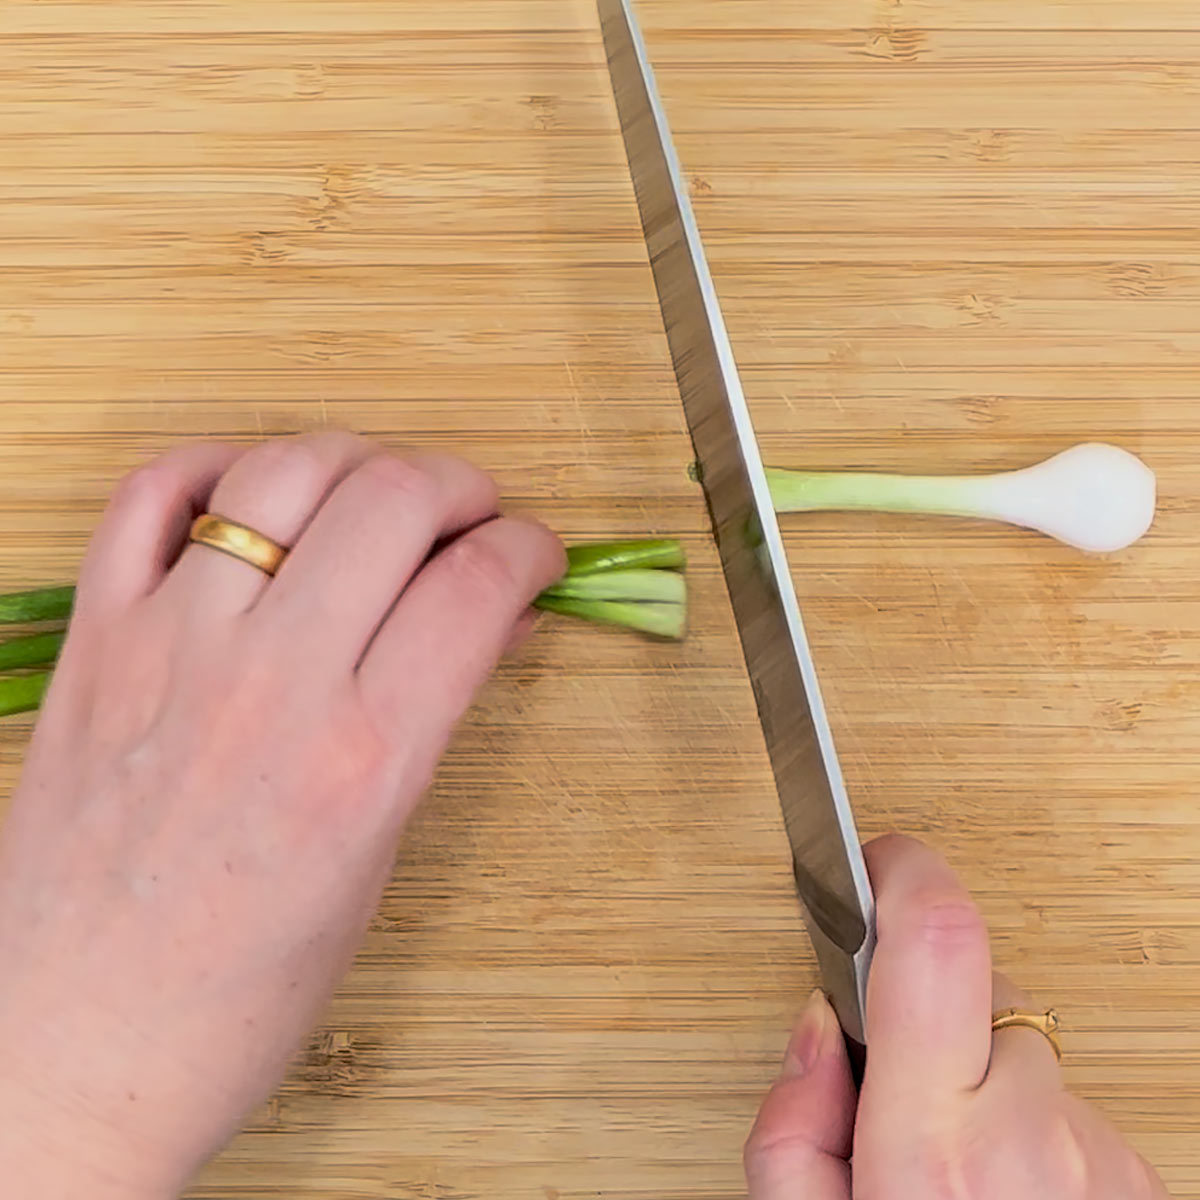 separate green onion stalk from the bulb